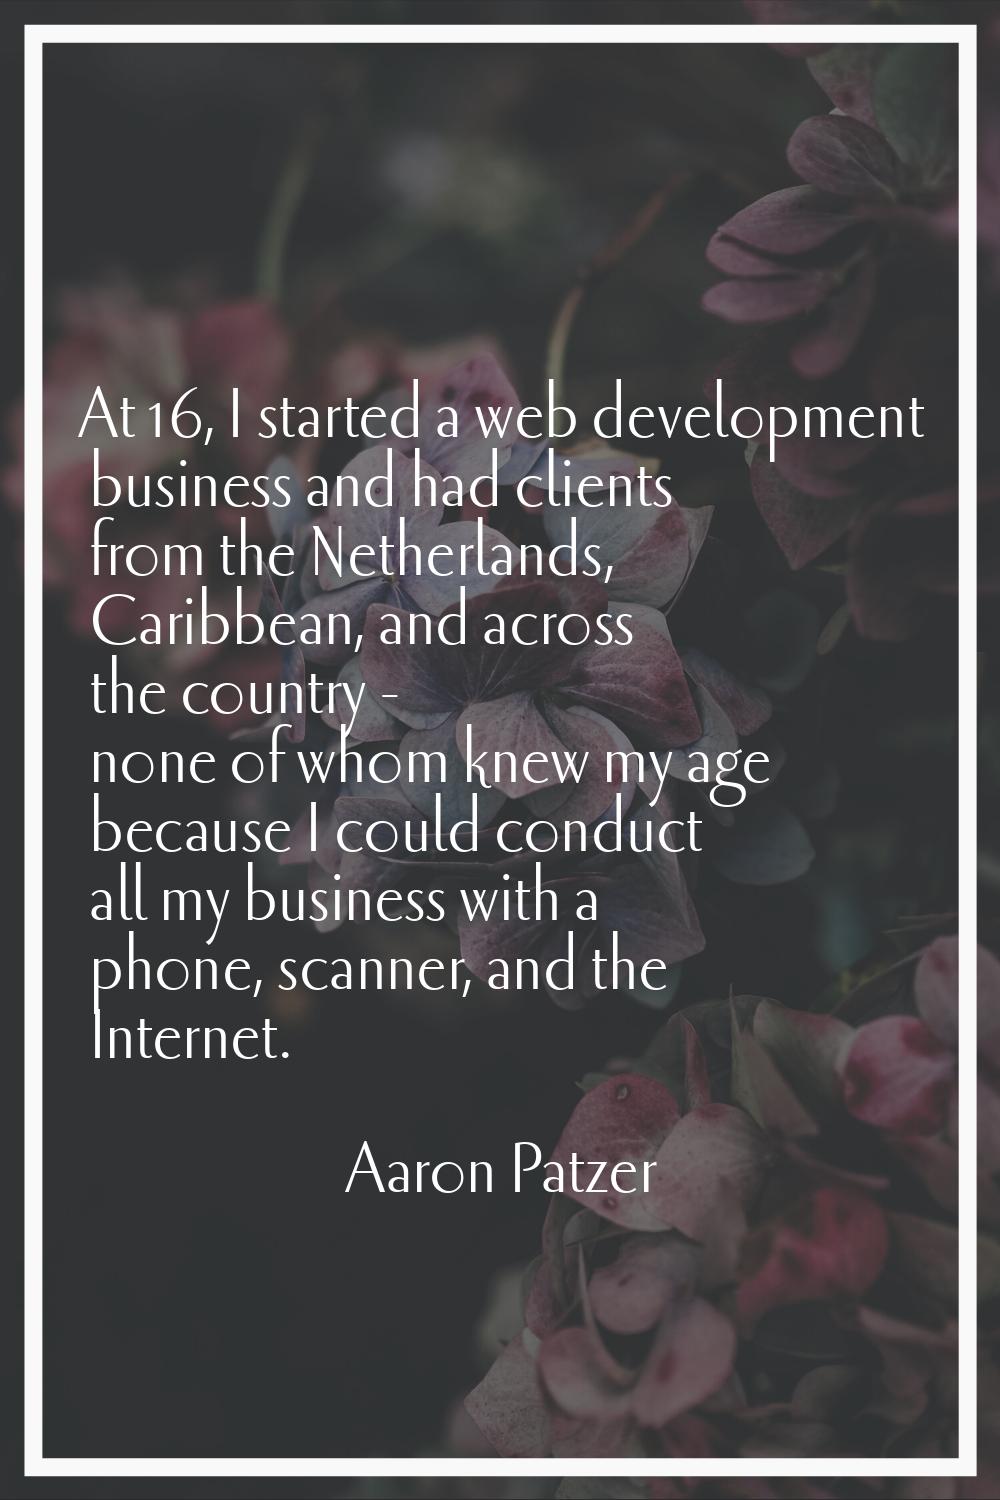 At 16, I started a web development business and had clients from the Netherlands, Caribbean, and ac